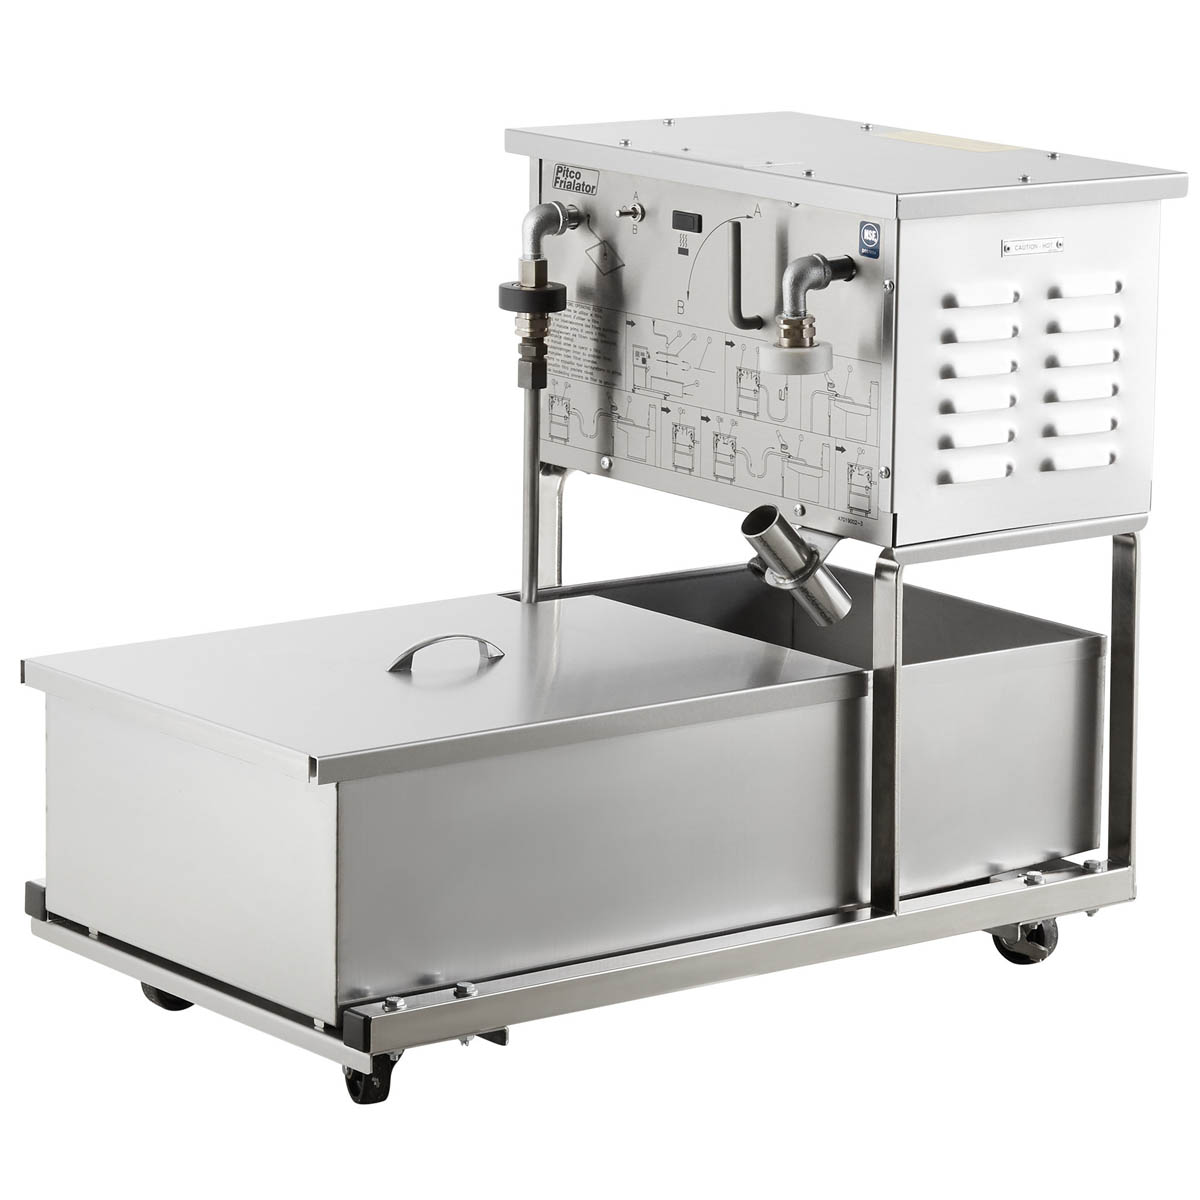 Pitco RP18 Mobile Fryer Filter